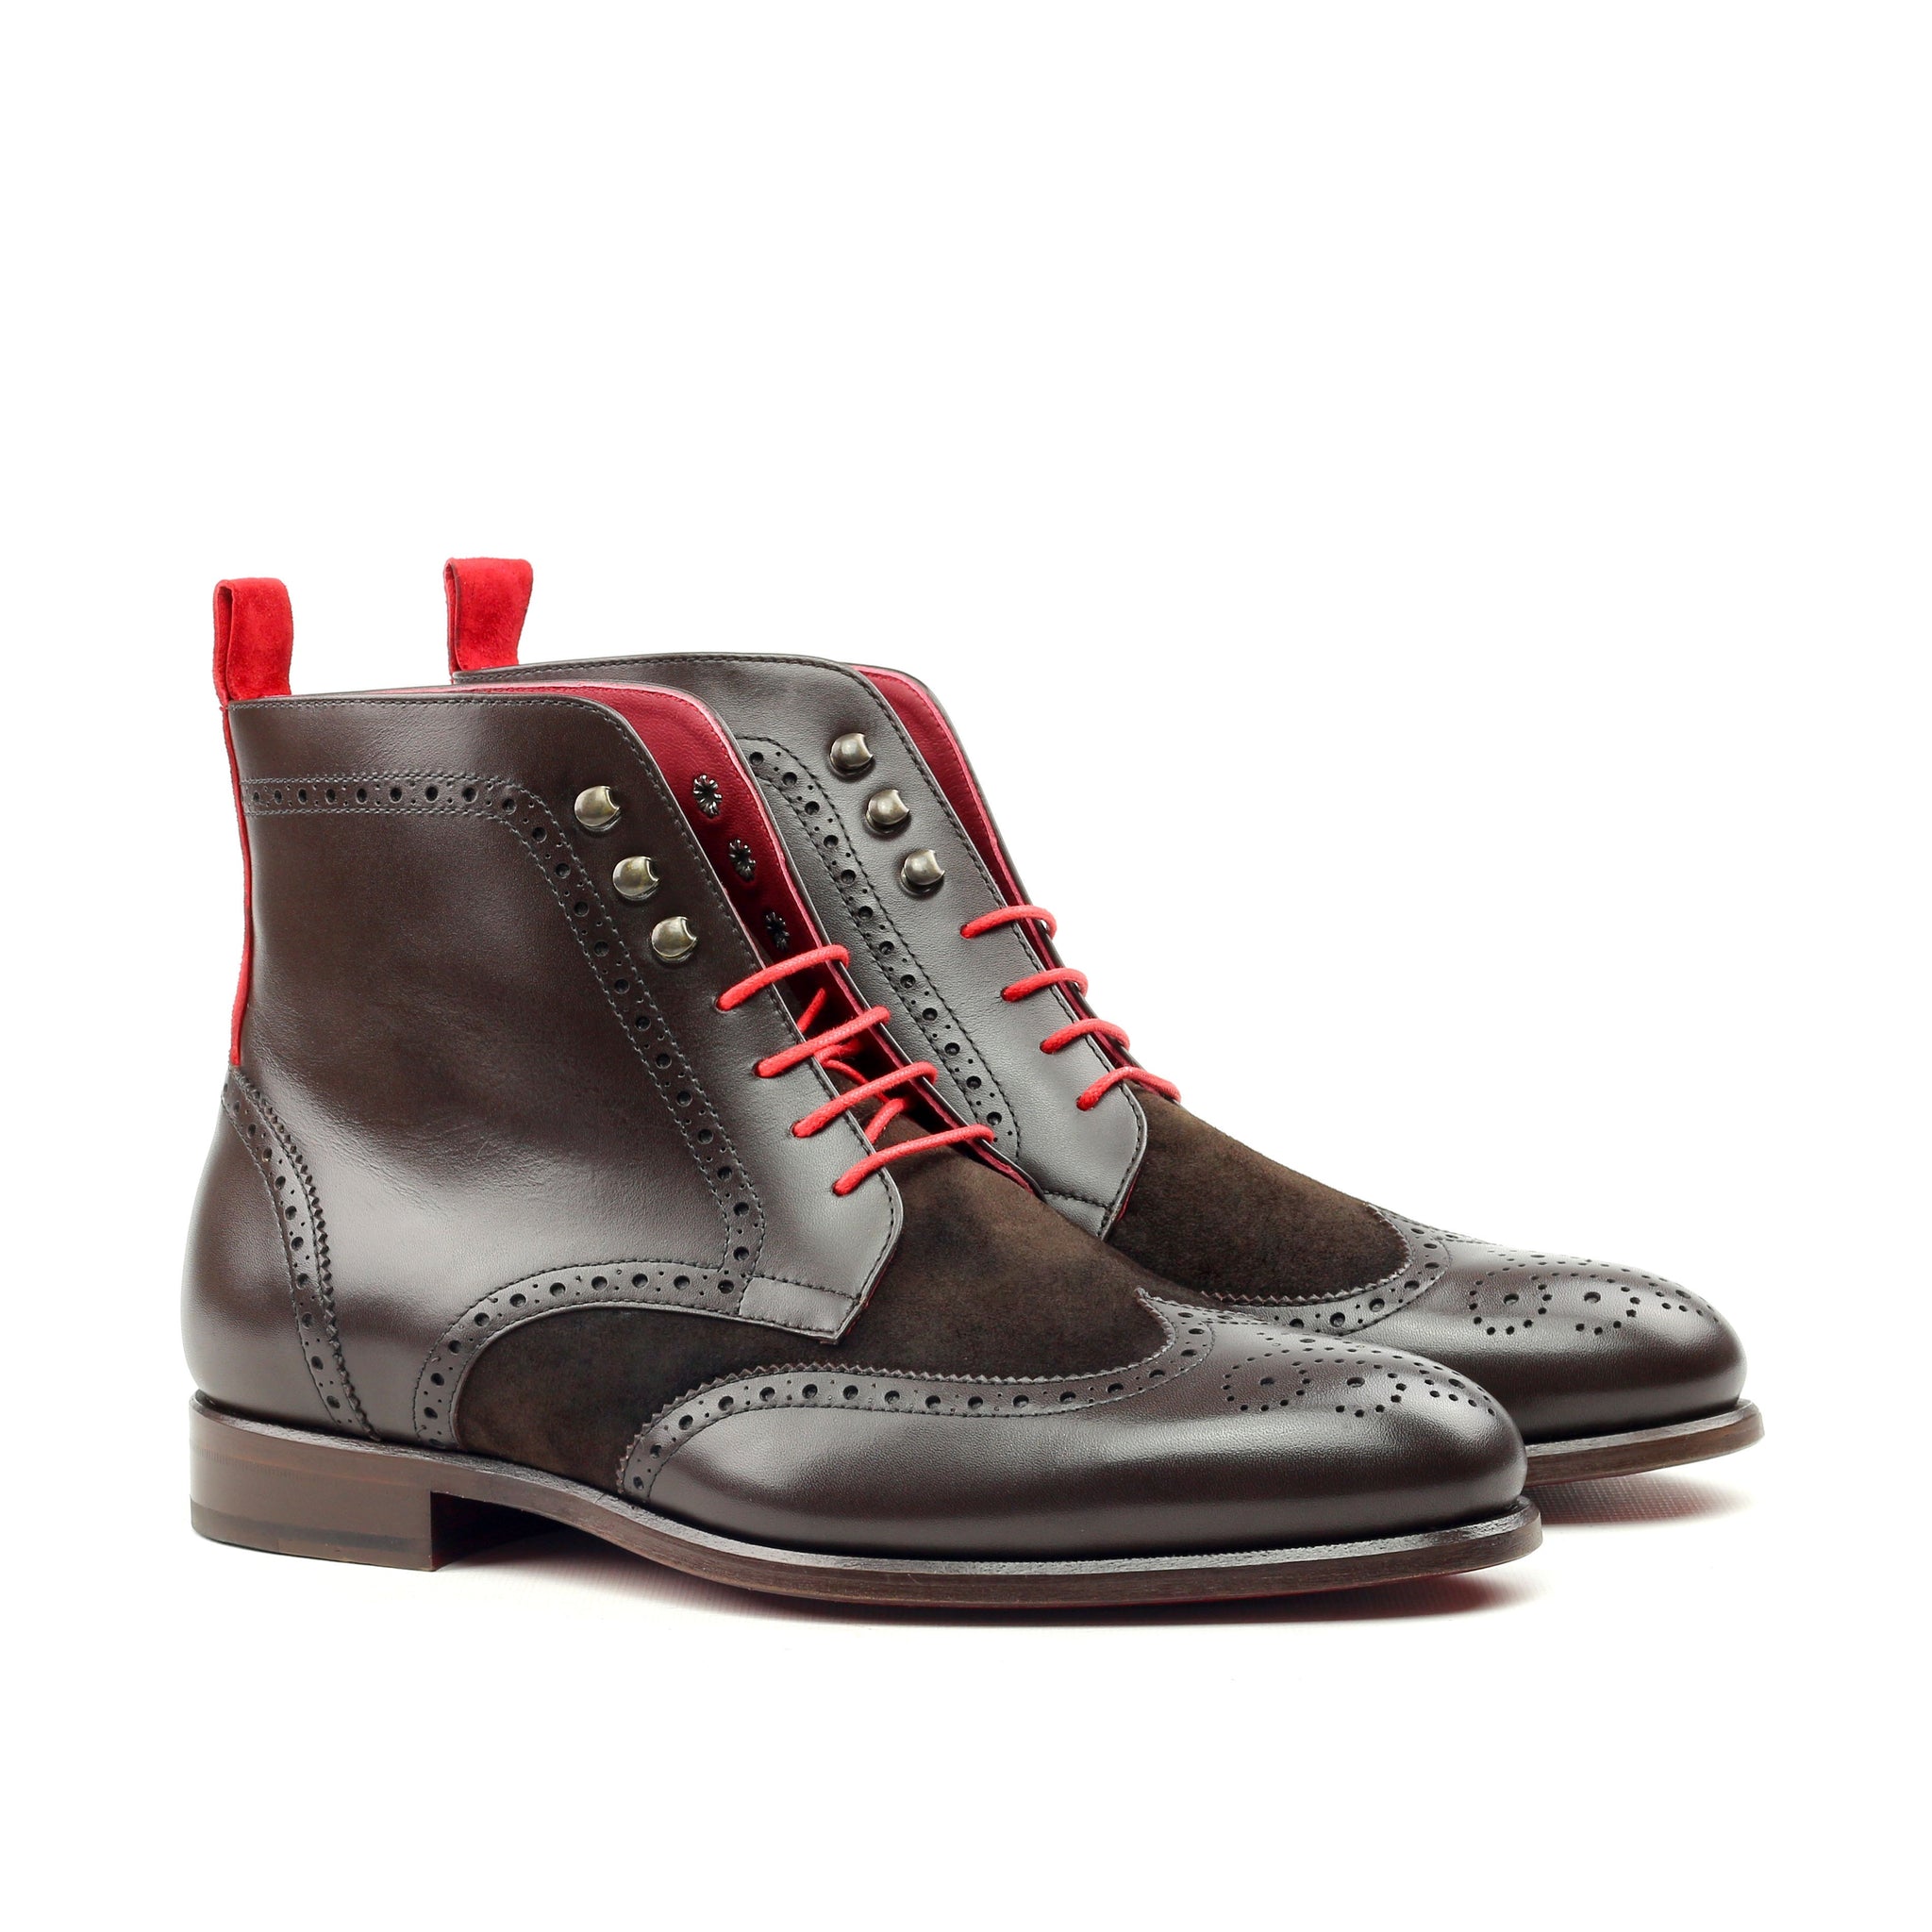 Unique Handcrafted Black Brogue Military Style Boot